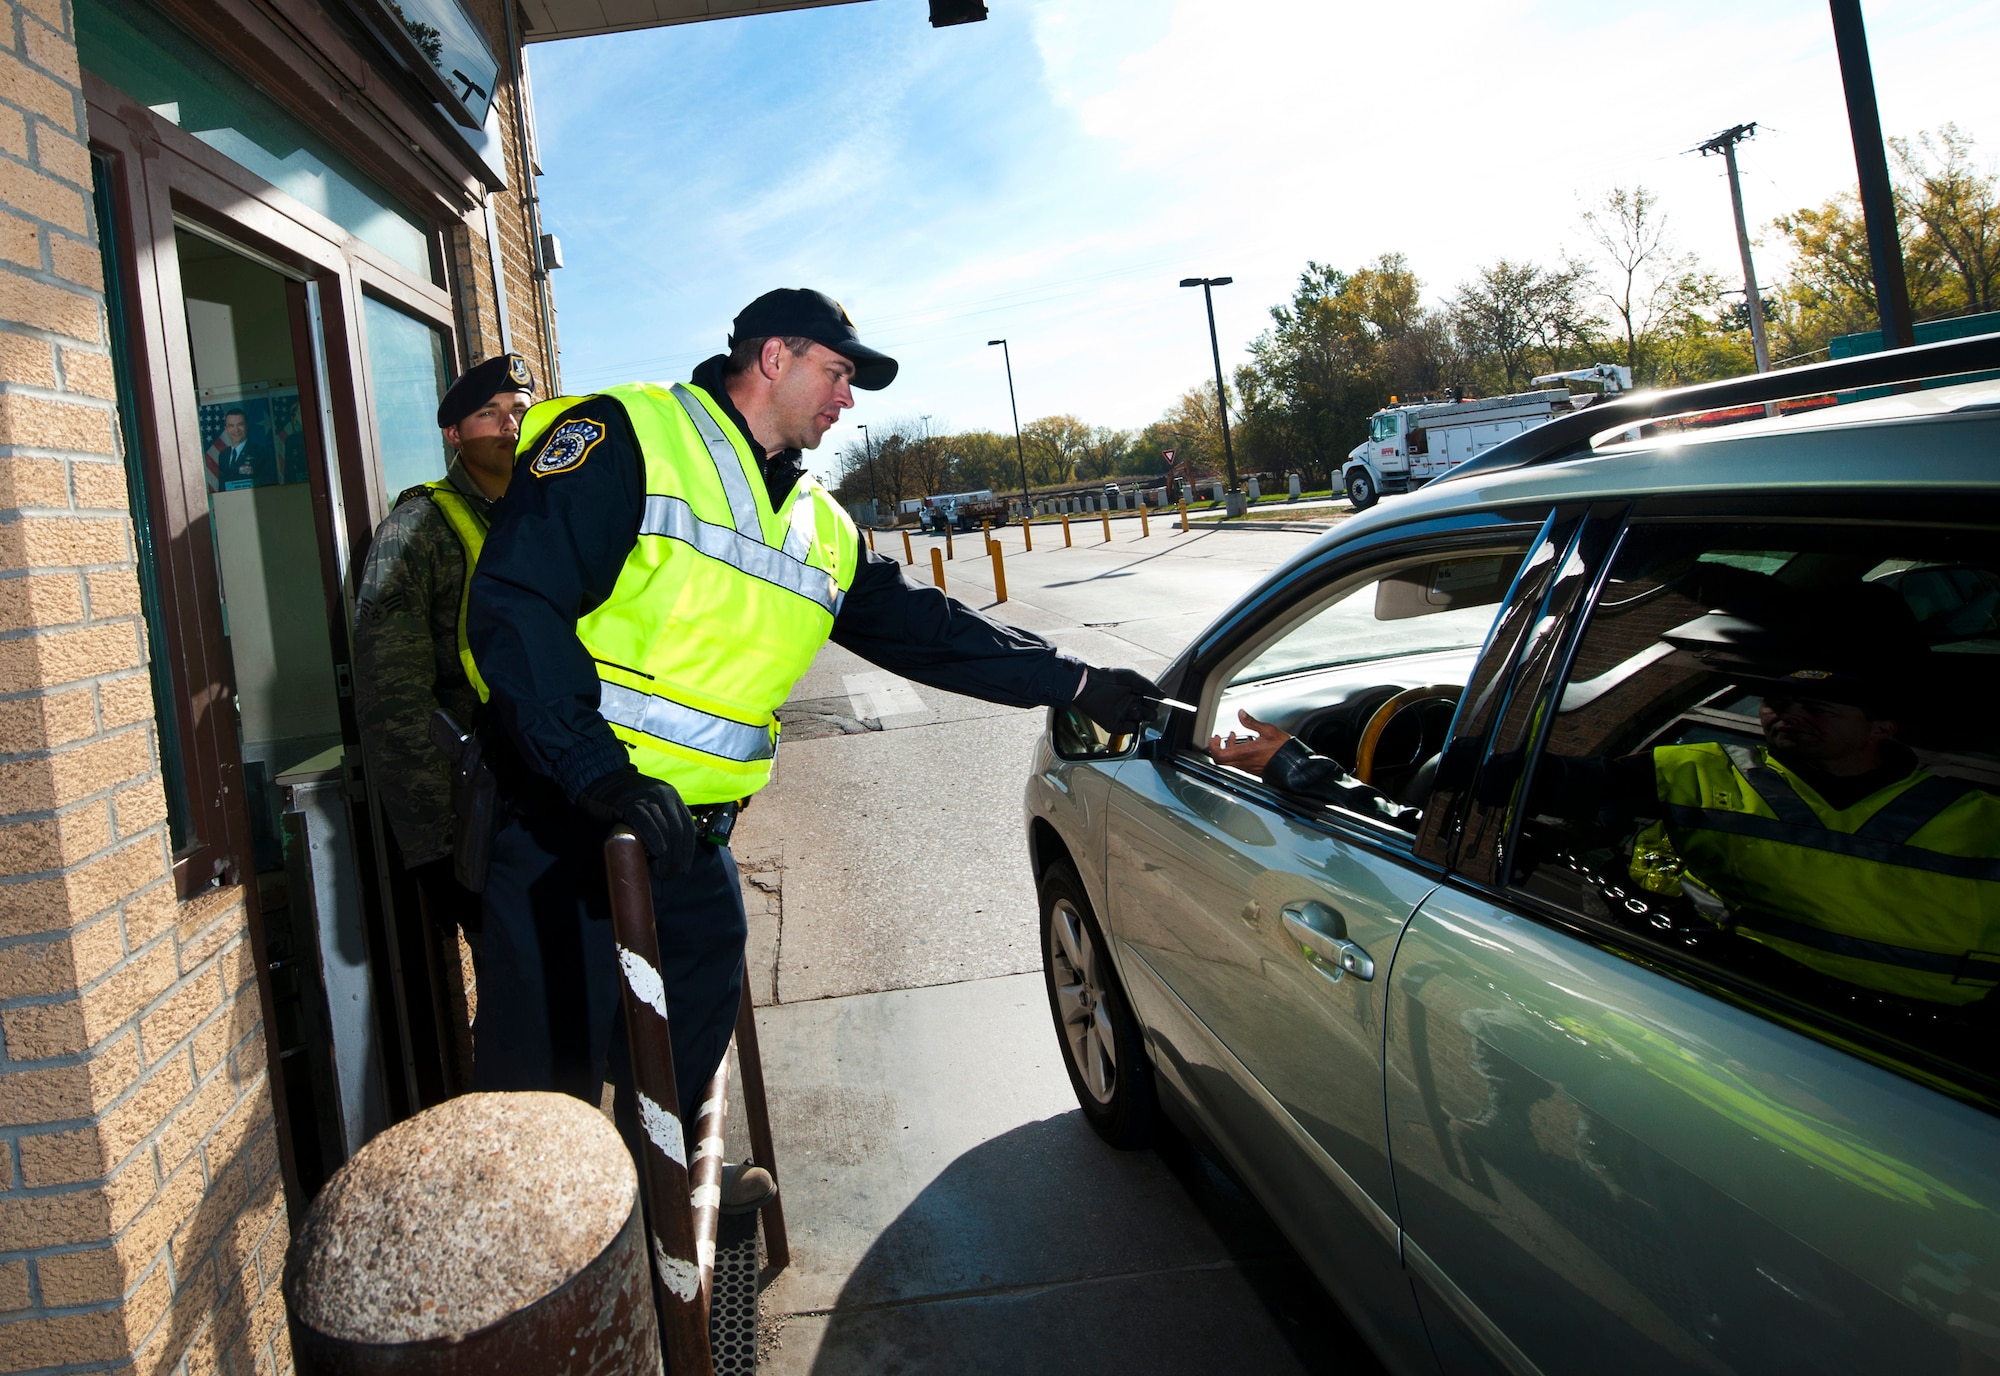 Dan Grove, a Department of the Air Force civilian police officer with the 55th Security Forces Squadron, keeps traffic moving through the U.S. Strategic Command gate as he checks identification cards at Offutt Air Force Base, Neb., Oct. 24. The 55 SFS is currently transitioning from contract gate guards to DAF civilian police officers. (U.S. Air Force photo by Josh Plueger/Released)